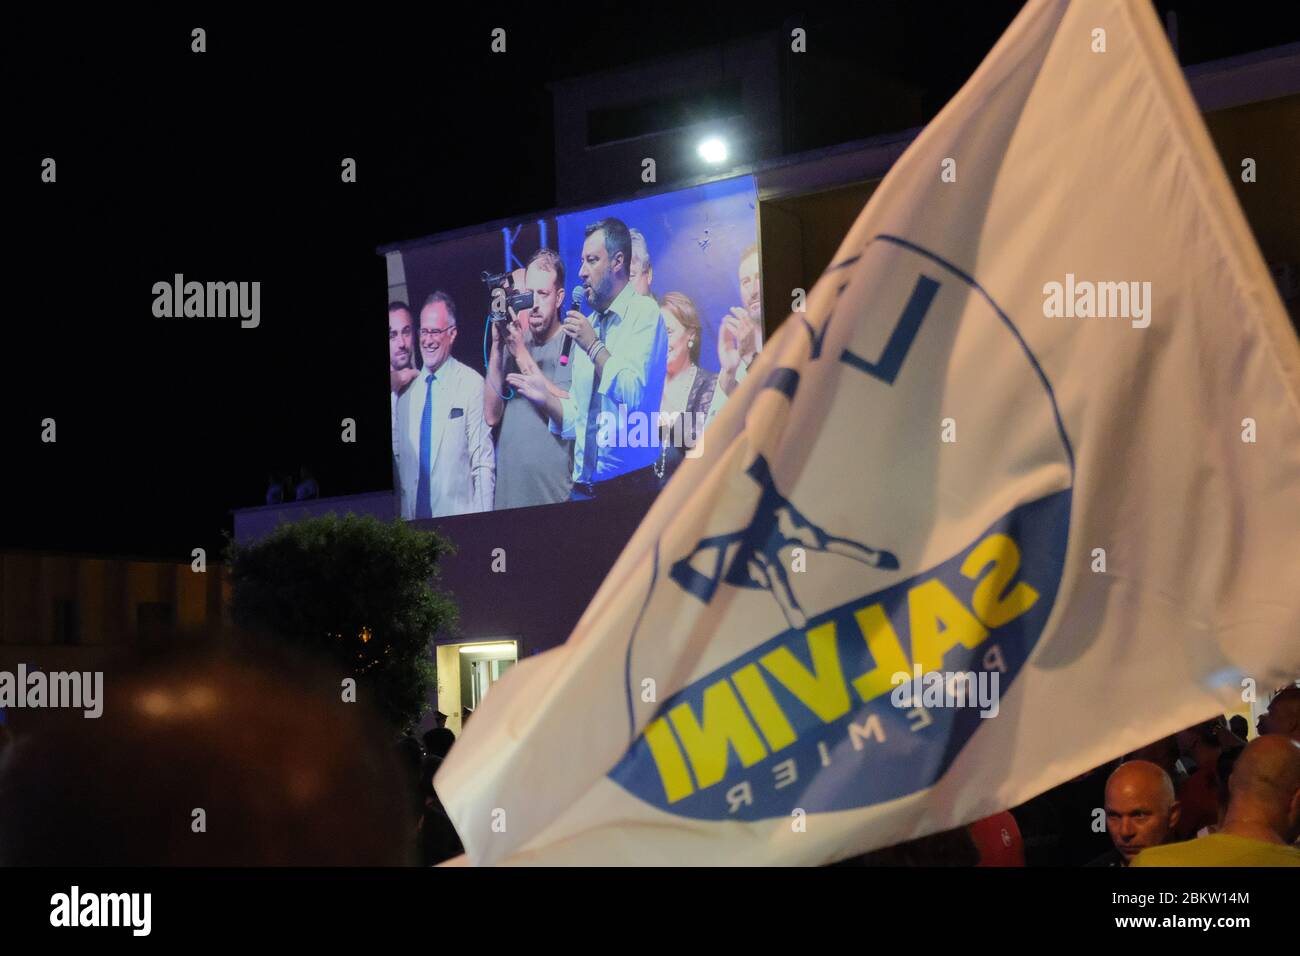 Matteo Salvini conducts a La Lega rally in Sabaudia, south of Rome. He speaks about immigration, traditional Italian values, globalisation and identity. The town's inhabitants are not traditional La Lega voters but Salvini's presence brought out a curious, if not sceptical, crowd. Stock Photo